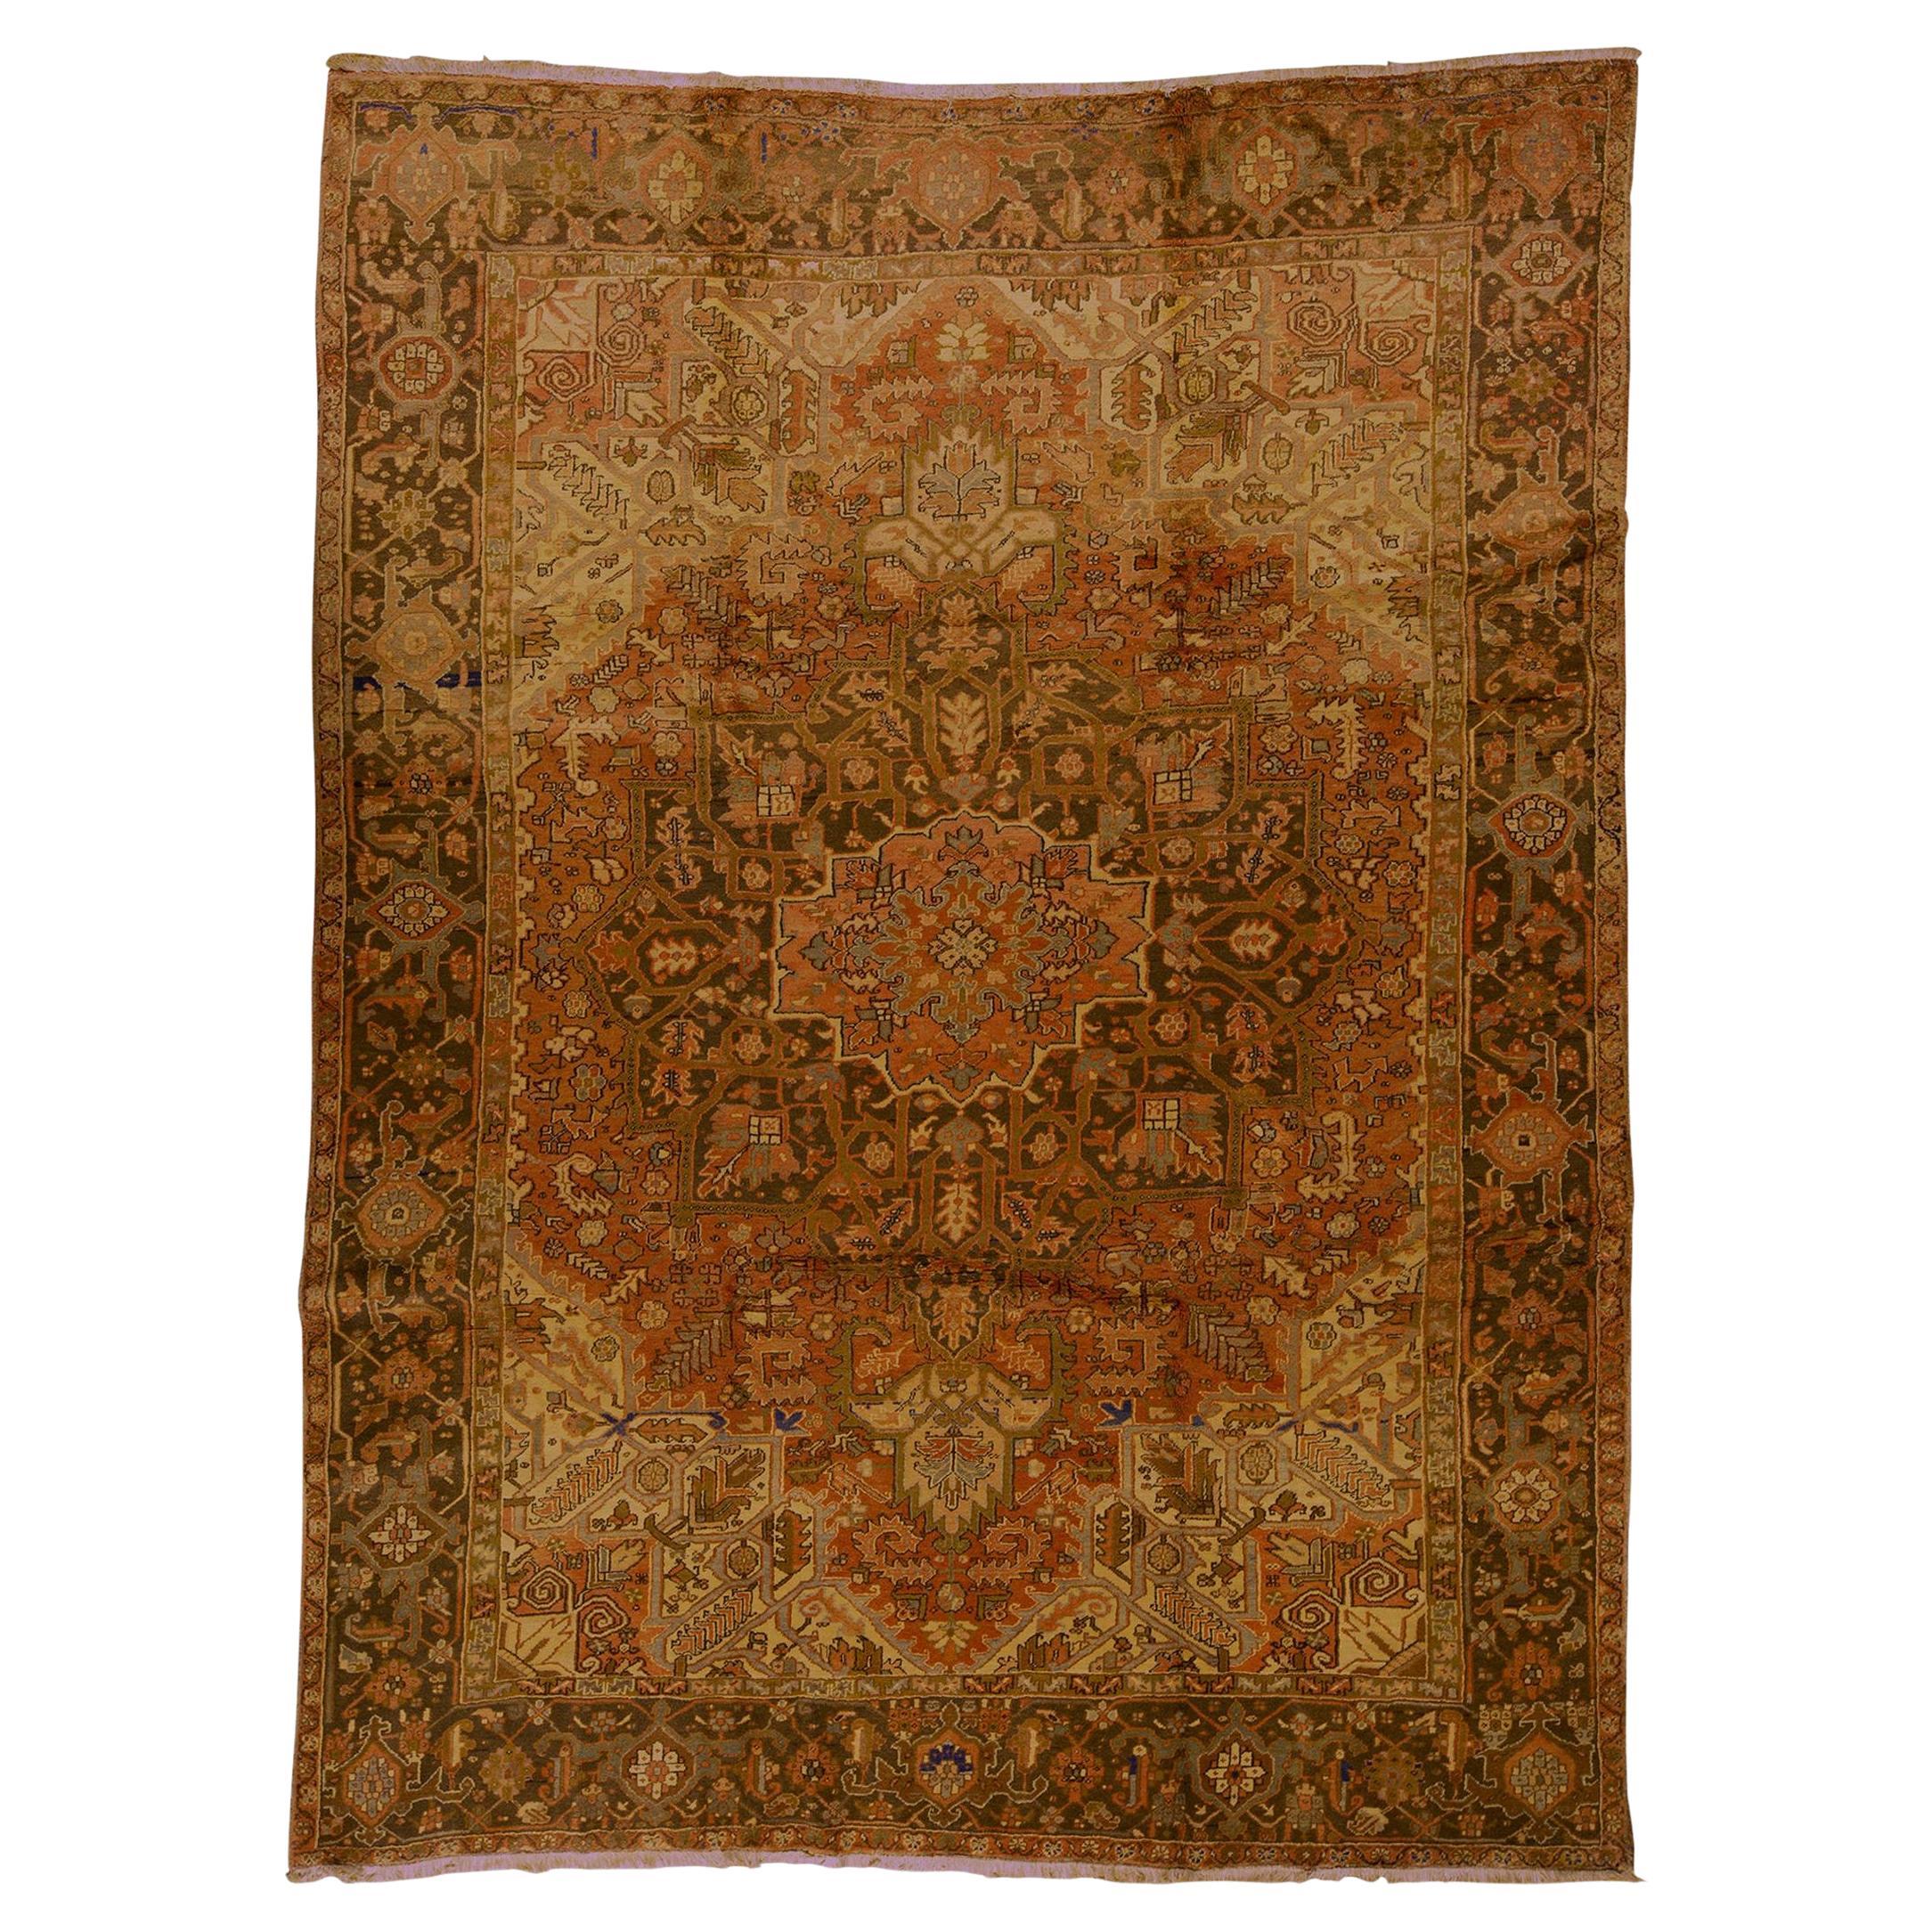  Antique Persian Fine Traditional Handwoven Luxury Wool Rust / Brown Rug